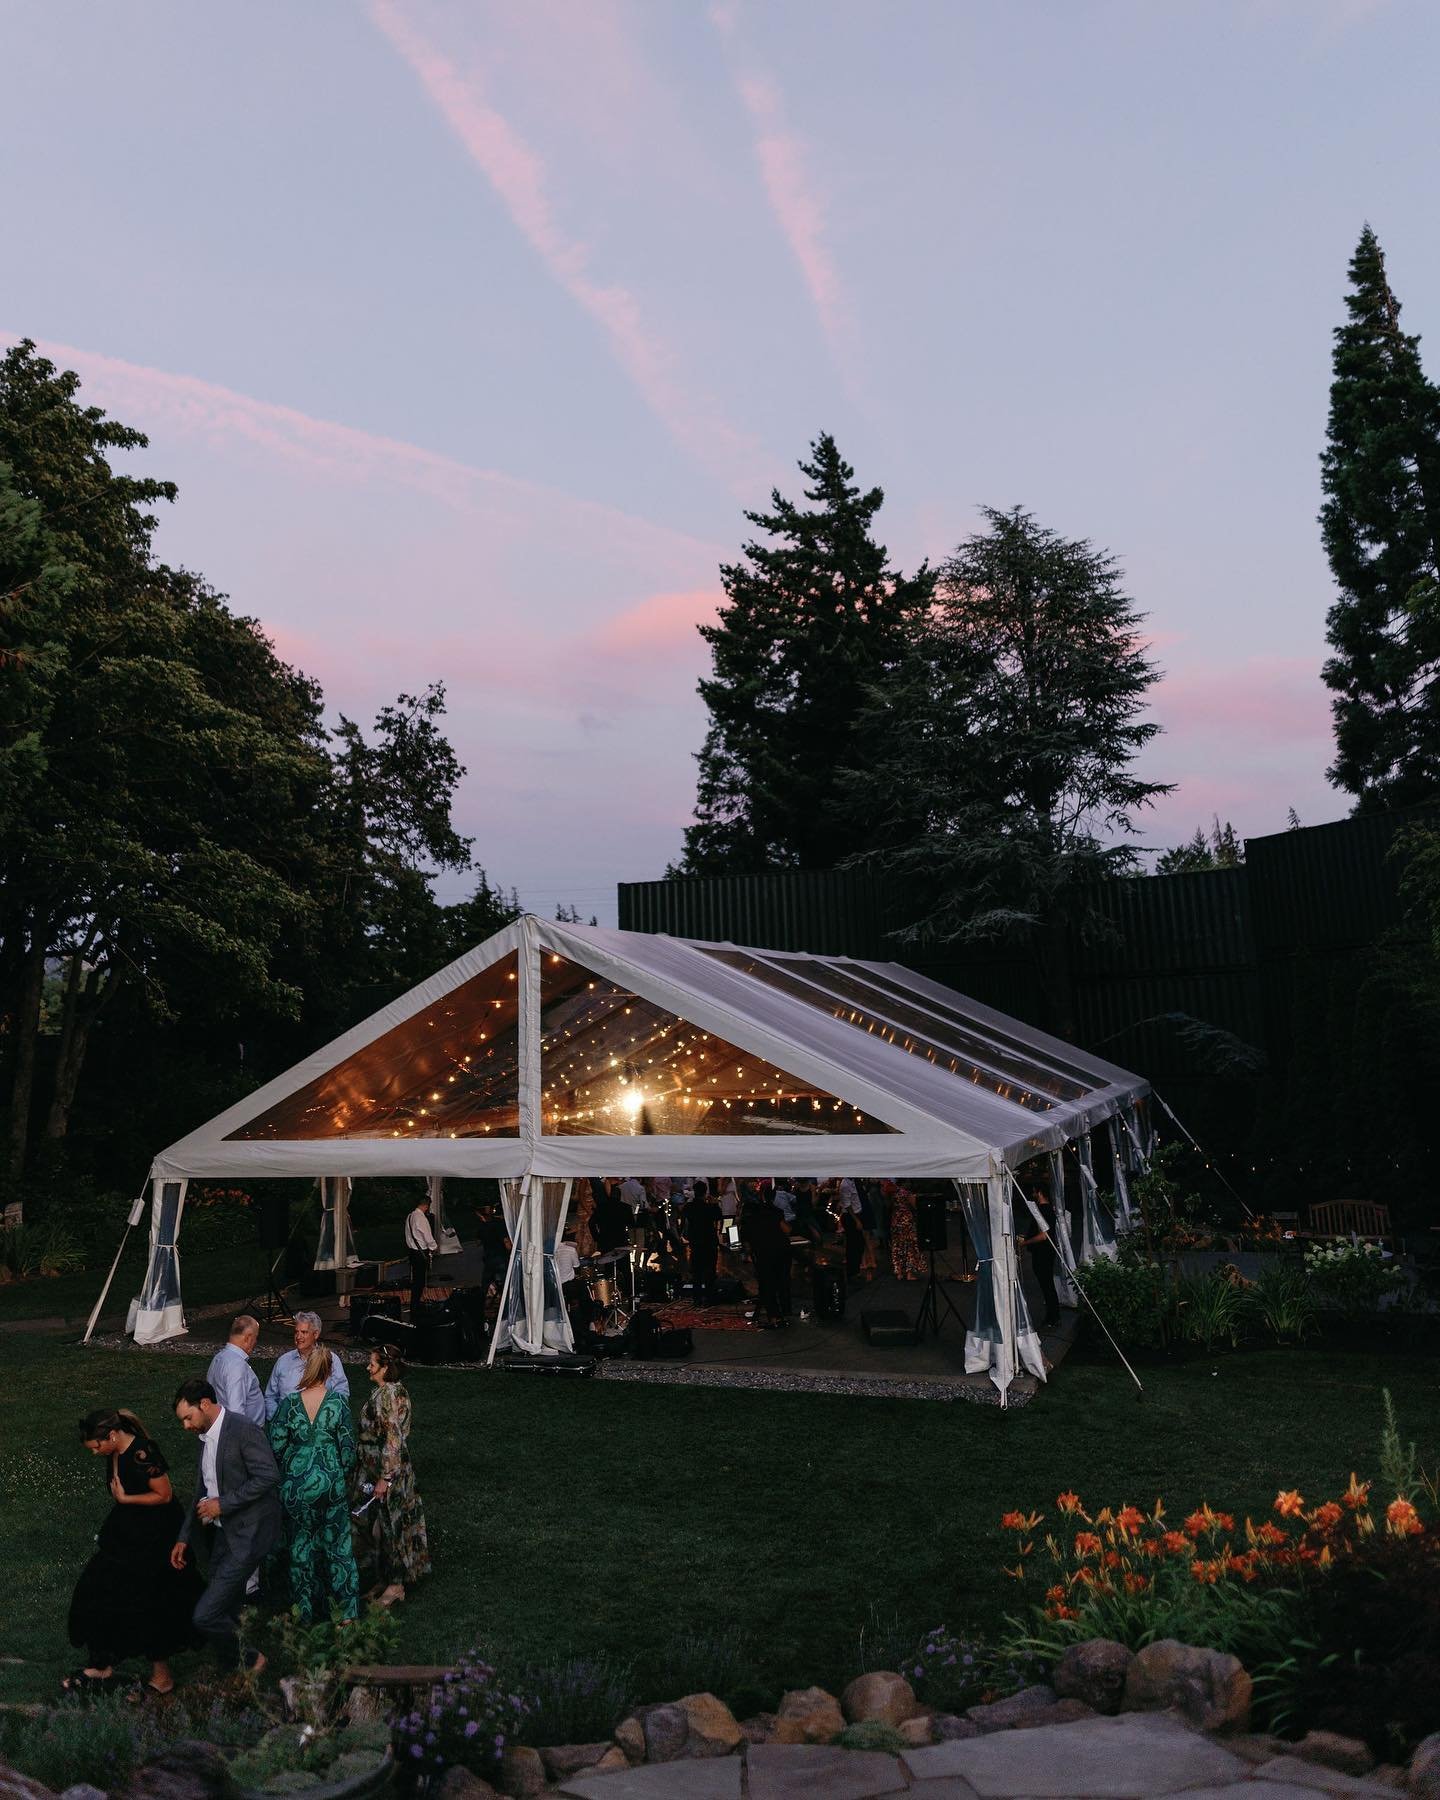 Sunset, clear tent, full band &amp; orange lilies - we&rsquo;d say this night was 12/10 ✨